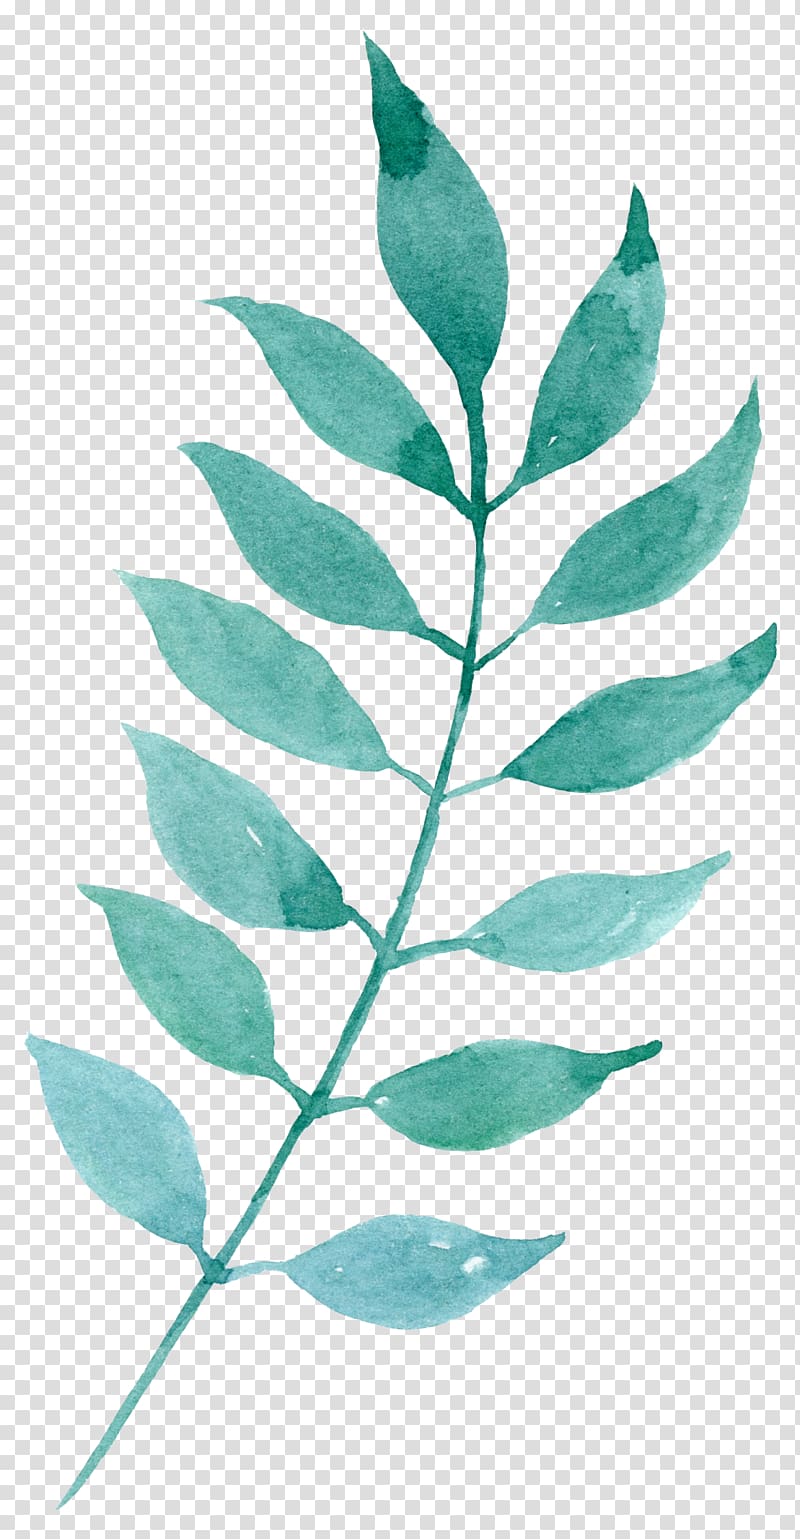 green leaf illustration, Watercolor painting Leaf, Hand-painted mint green leaves transparent background PNG clipart